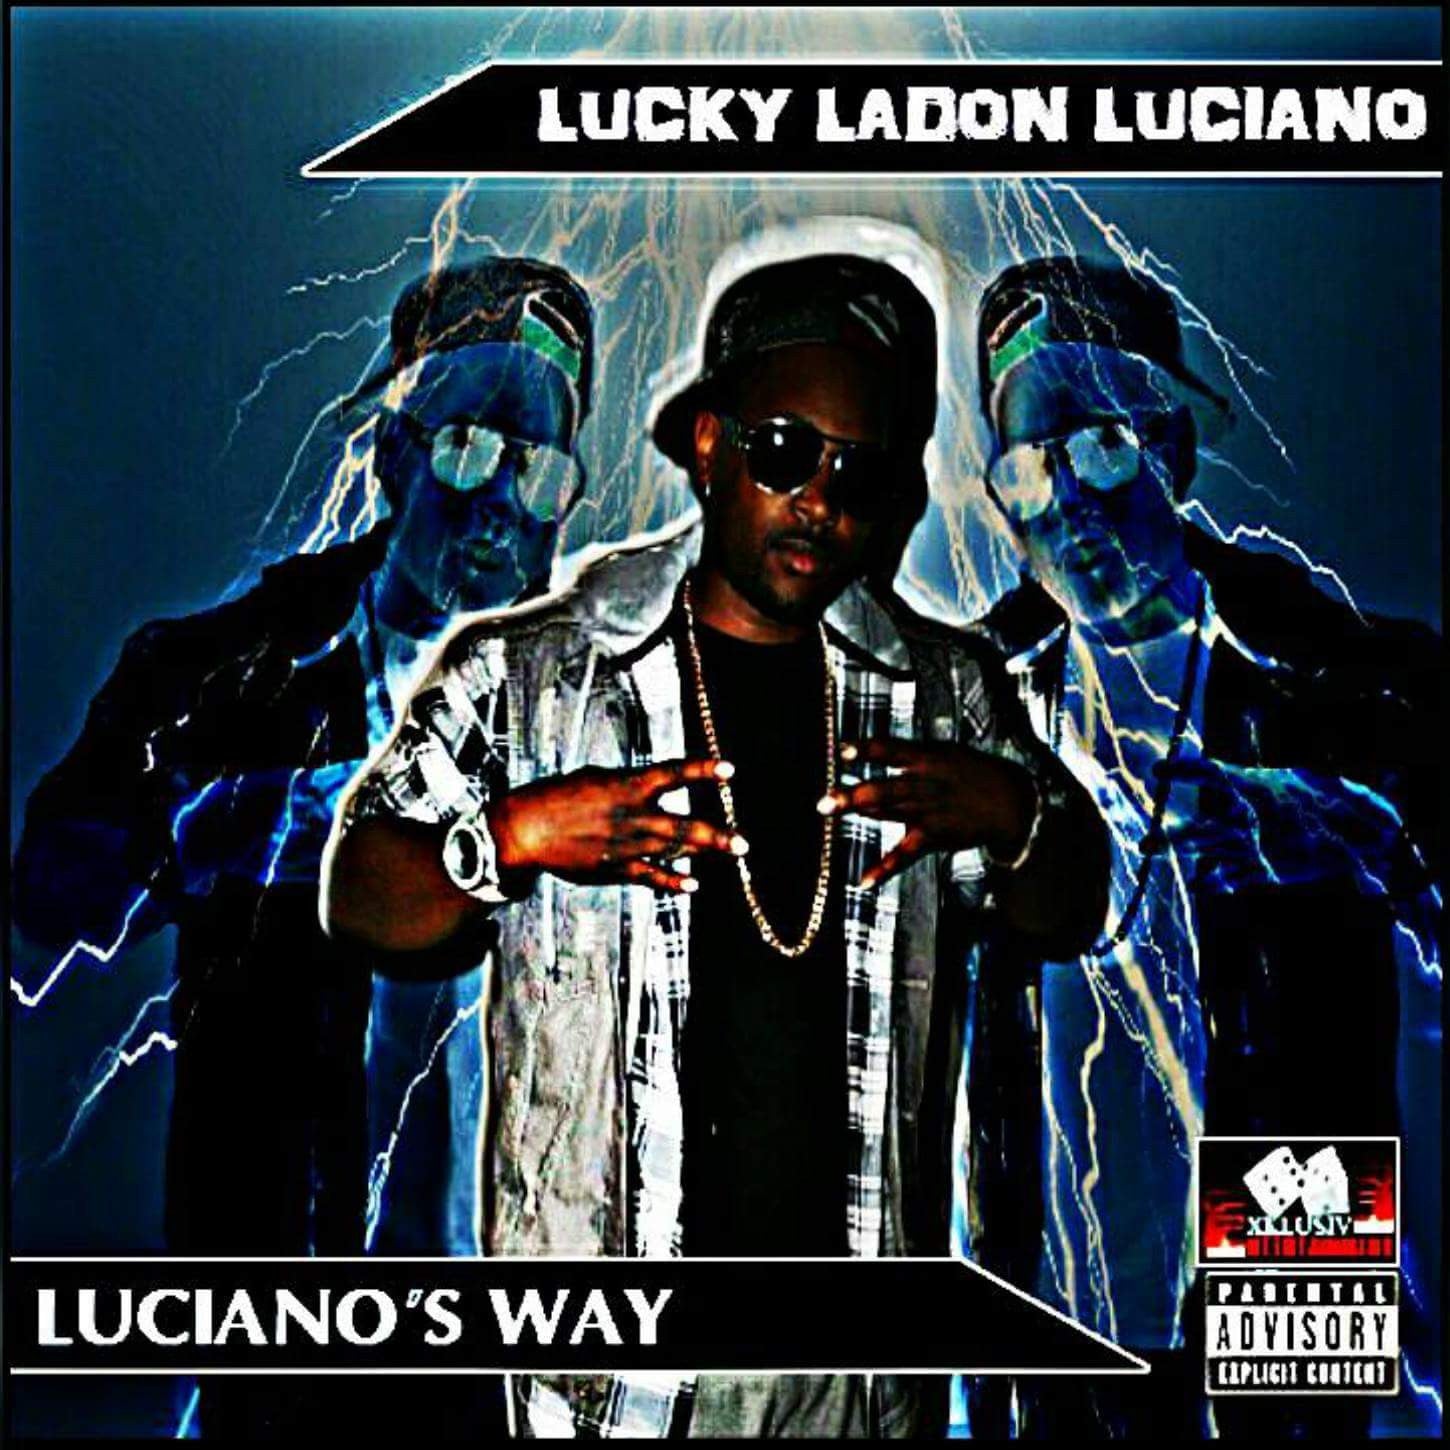 Luciano's Way